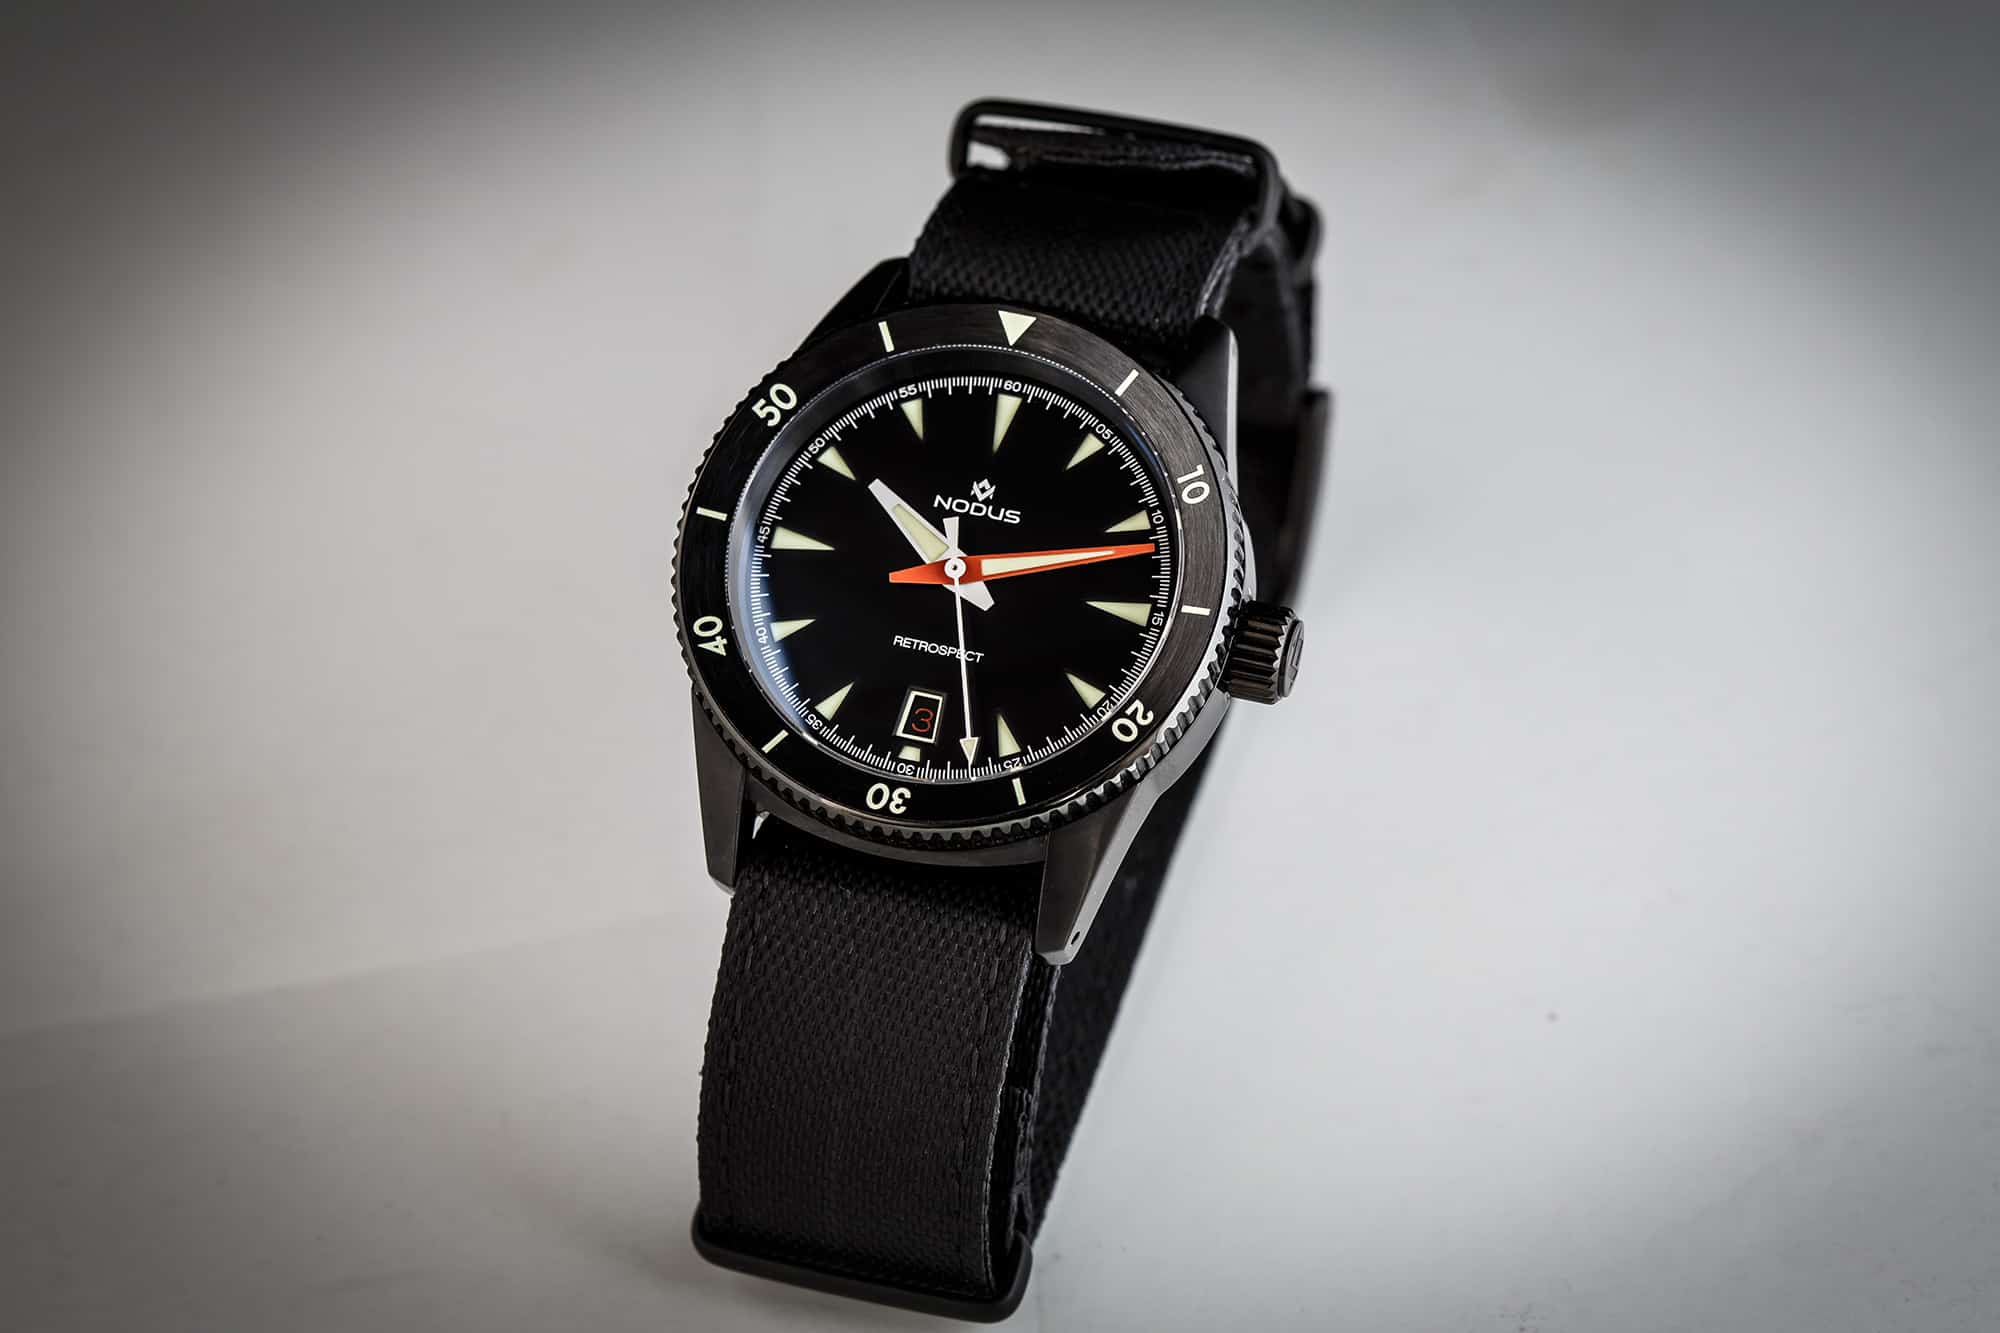 Nodus Blacks out the Retrospect for a Very Limited Special Edition